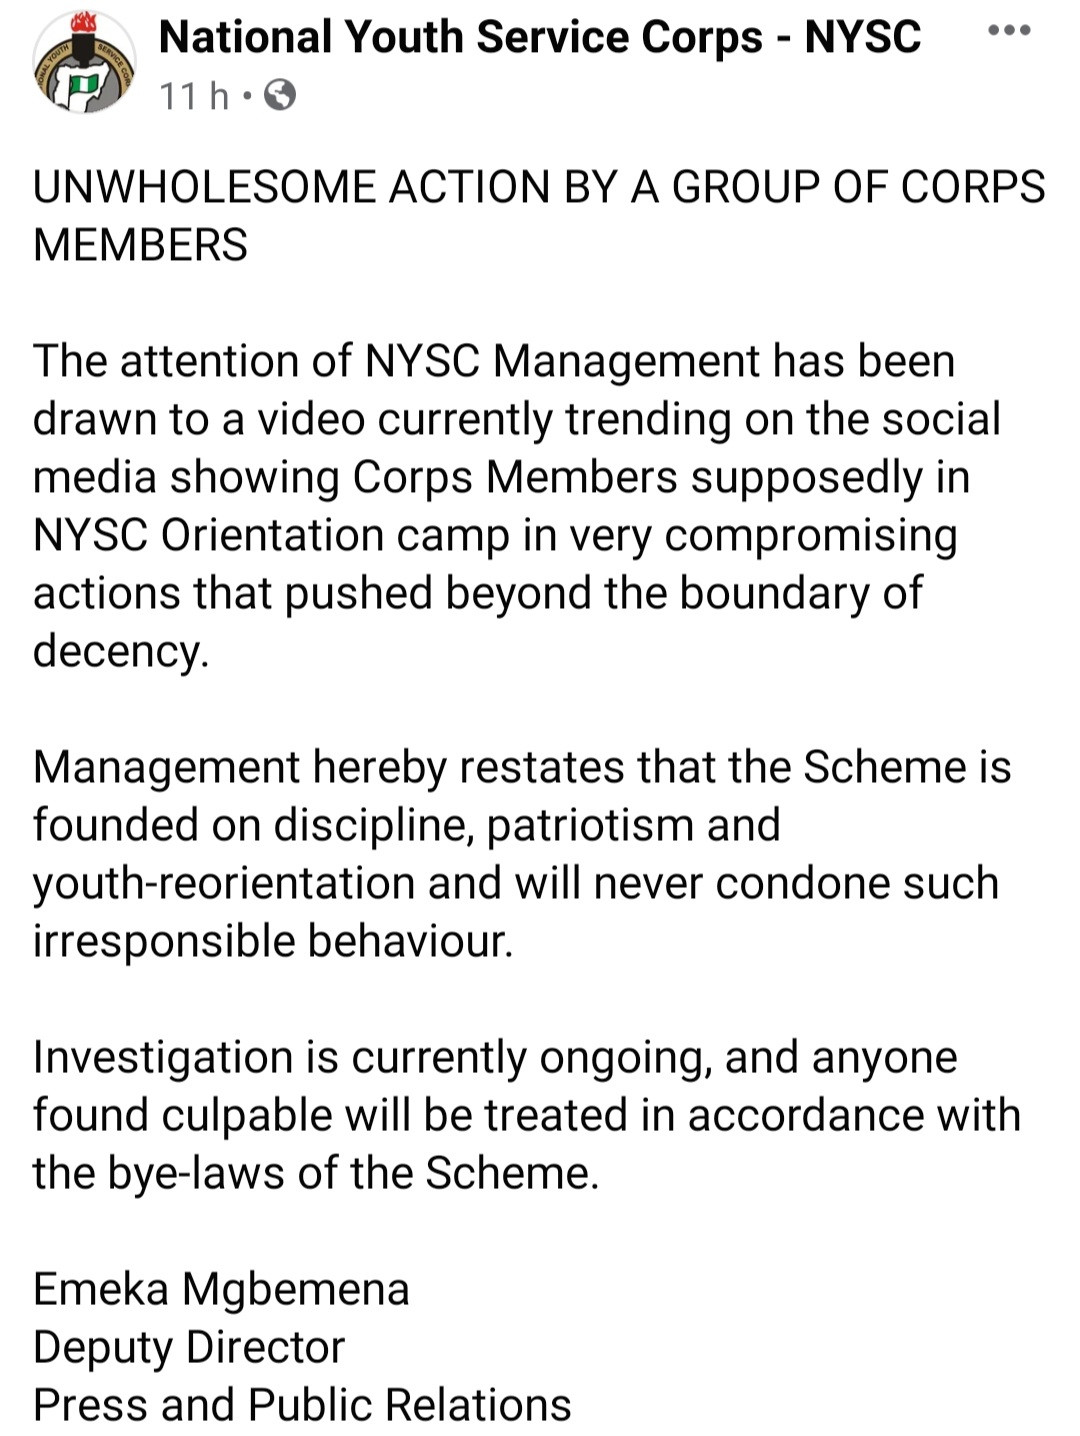 NYSC reacts